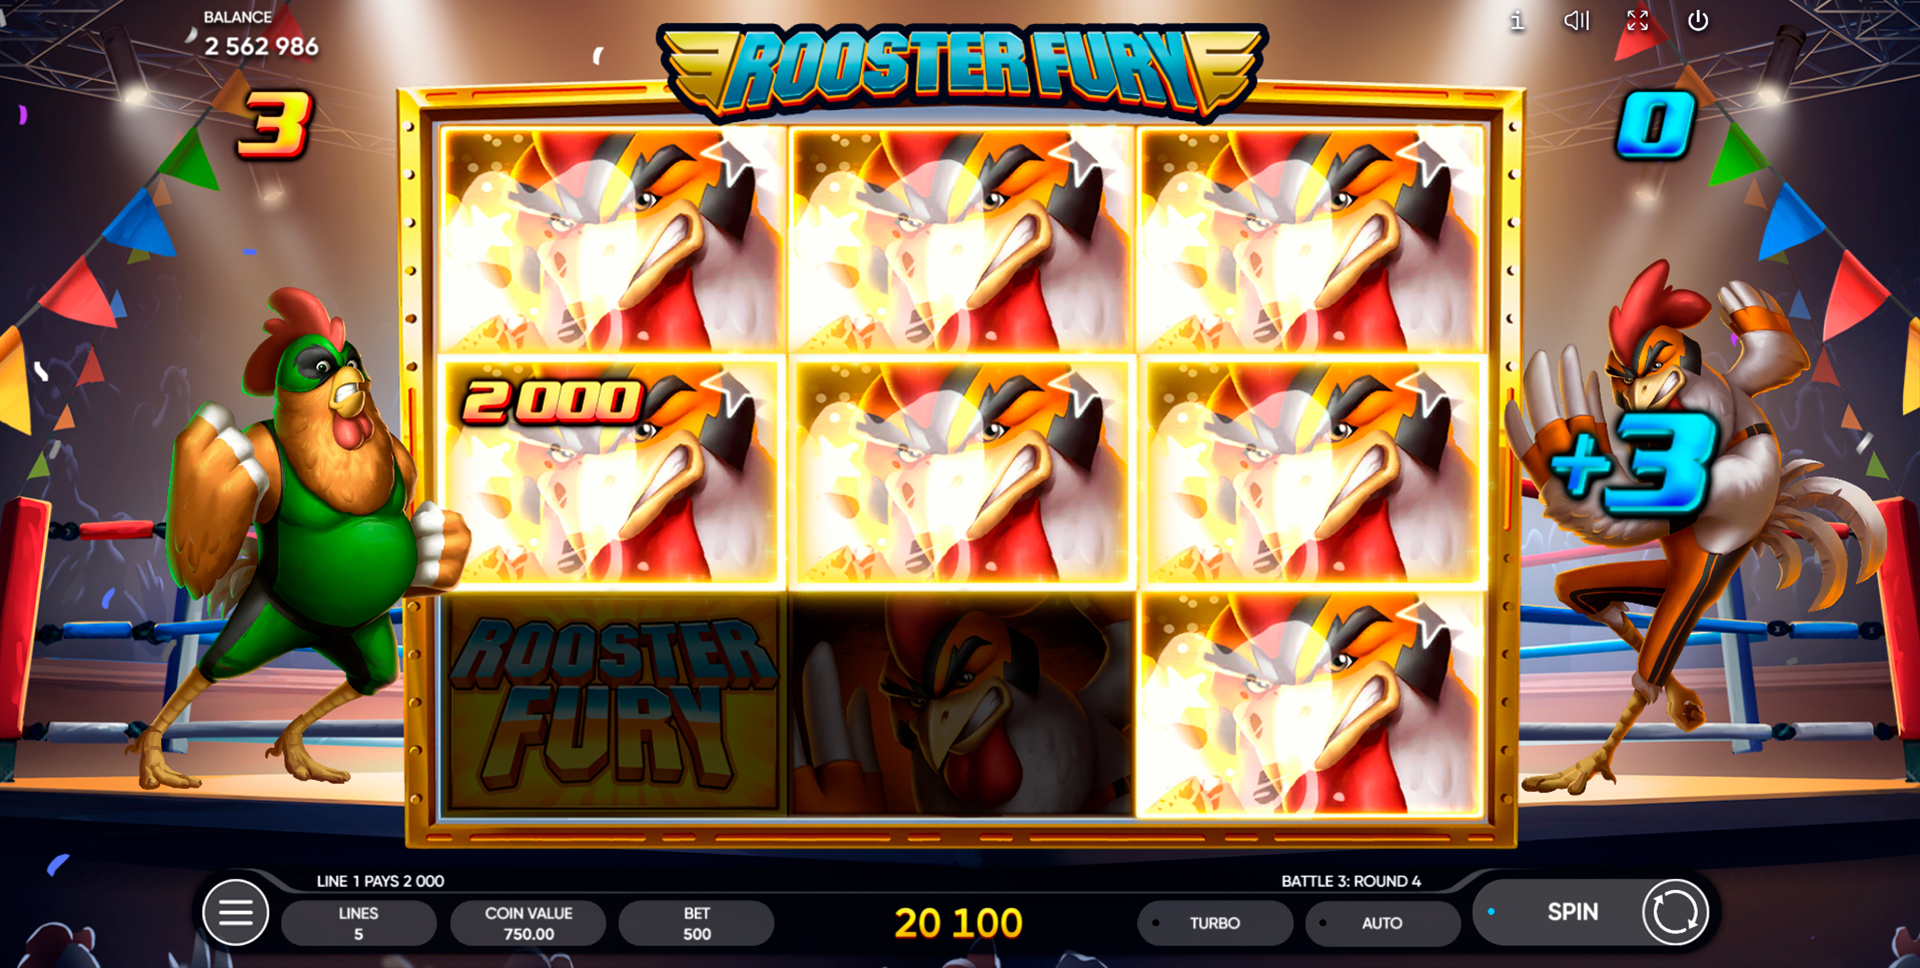 Win Money in Rooster Fury Free Slot Game by Endorphina